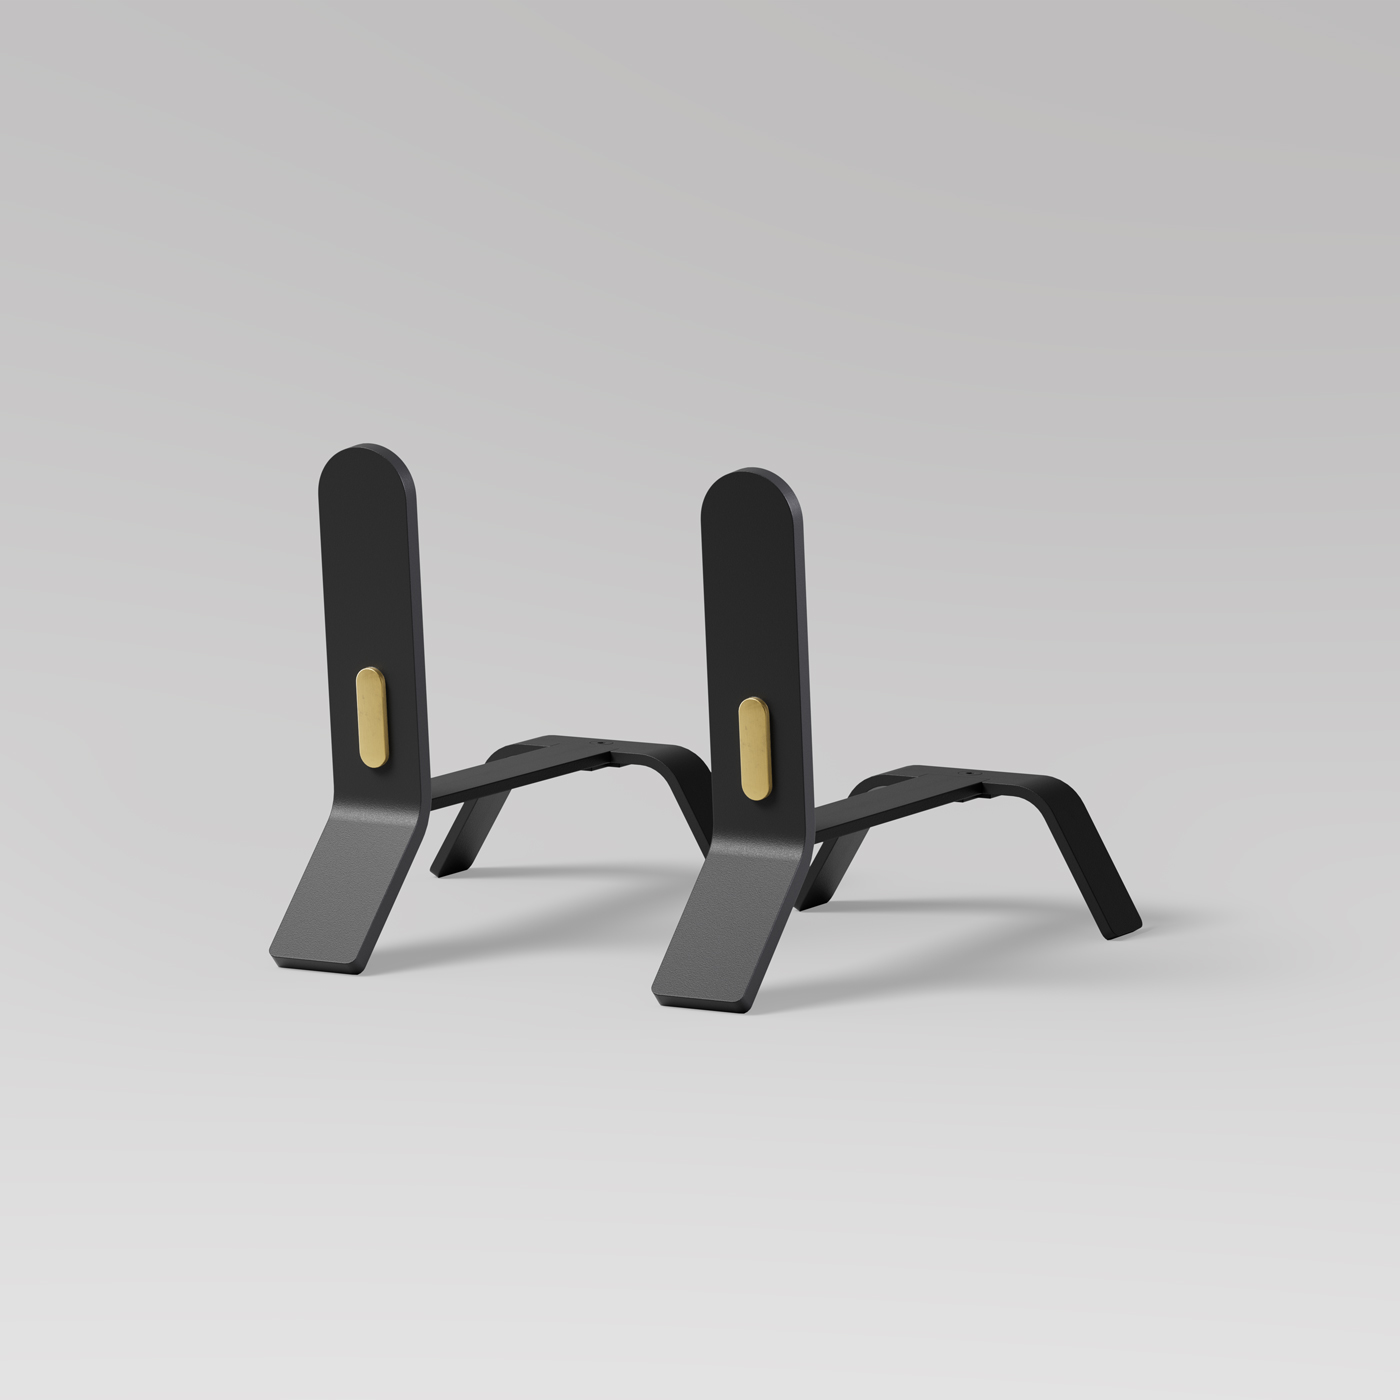 A pair of sleek, black metal stands with gold-colored accents at the center of the vertical supports. The stands have a modern, minimalist design with angular bases and a smooth matte finish, set against a plain light gray background.